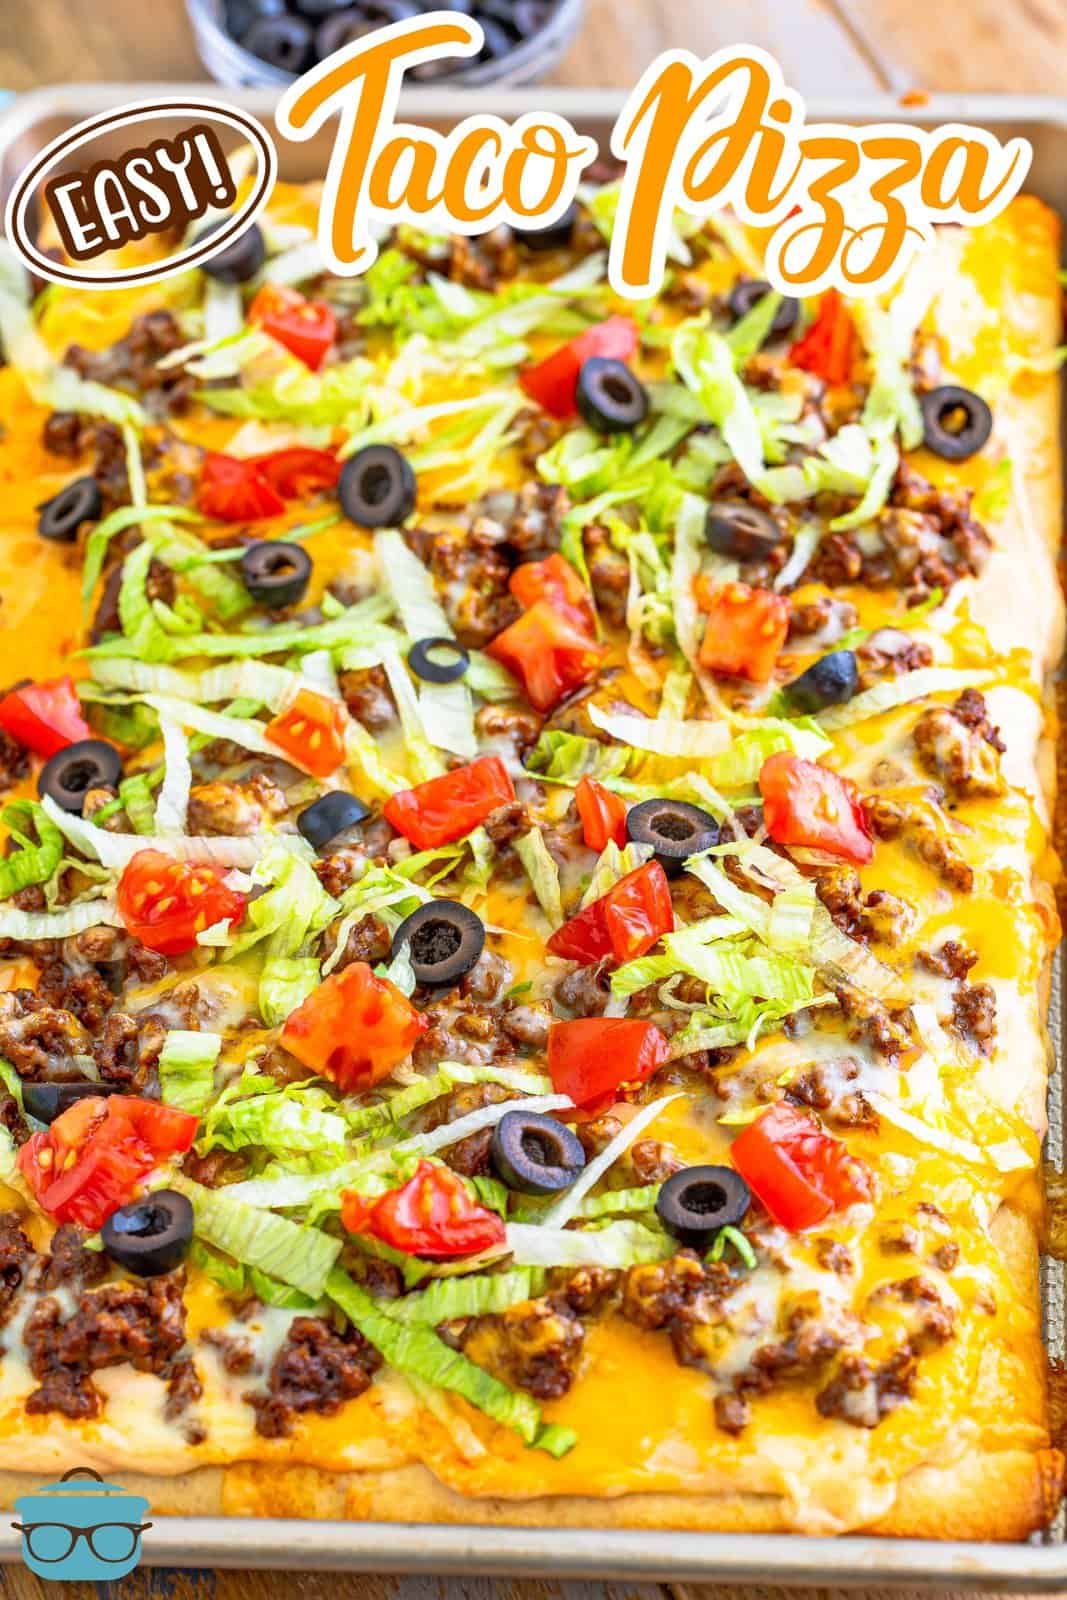 a fully made beef taco pizza shown in a baking pan.